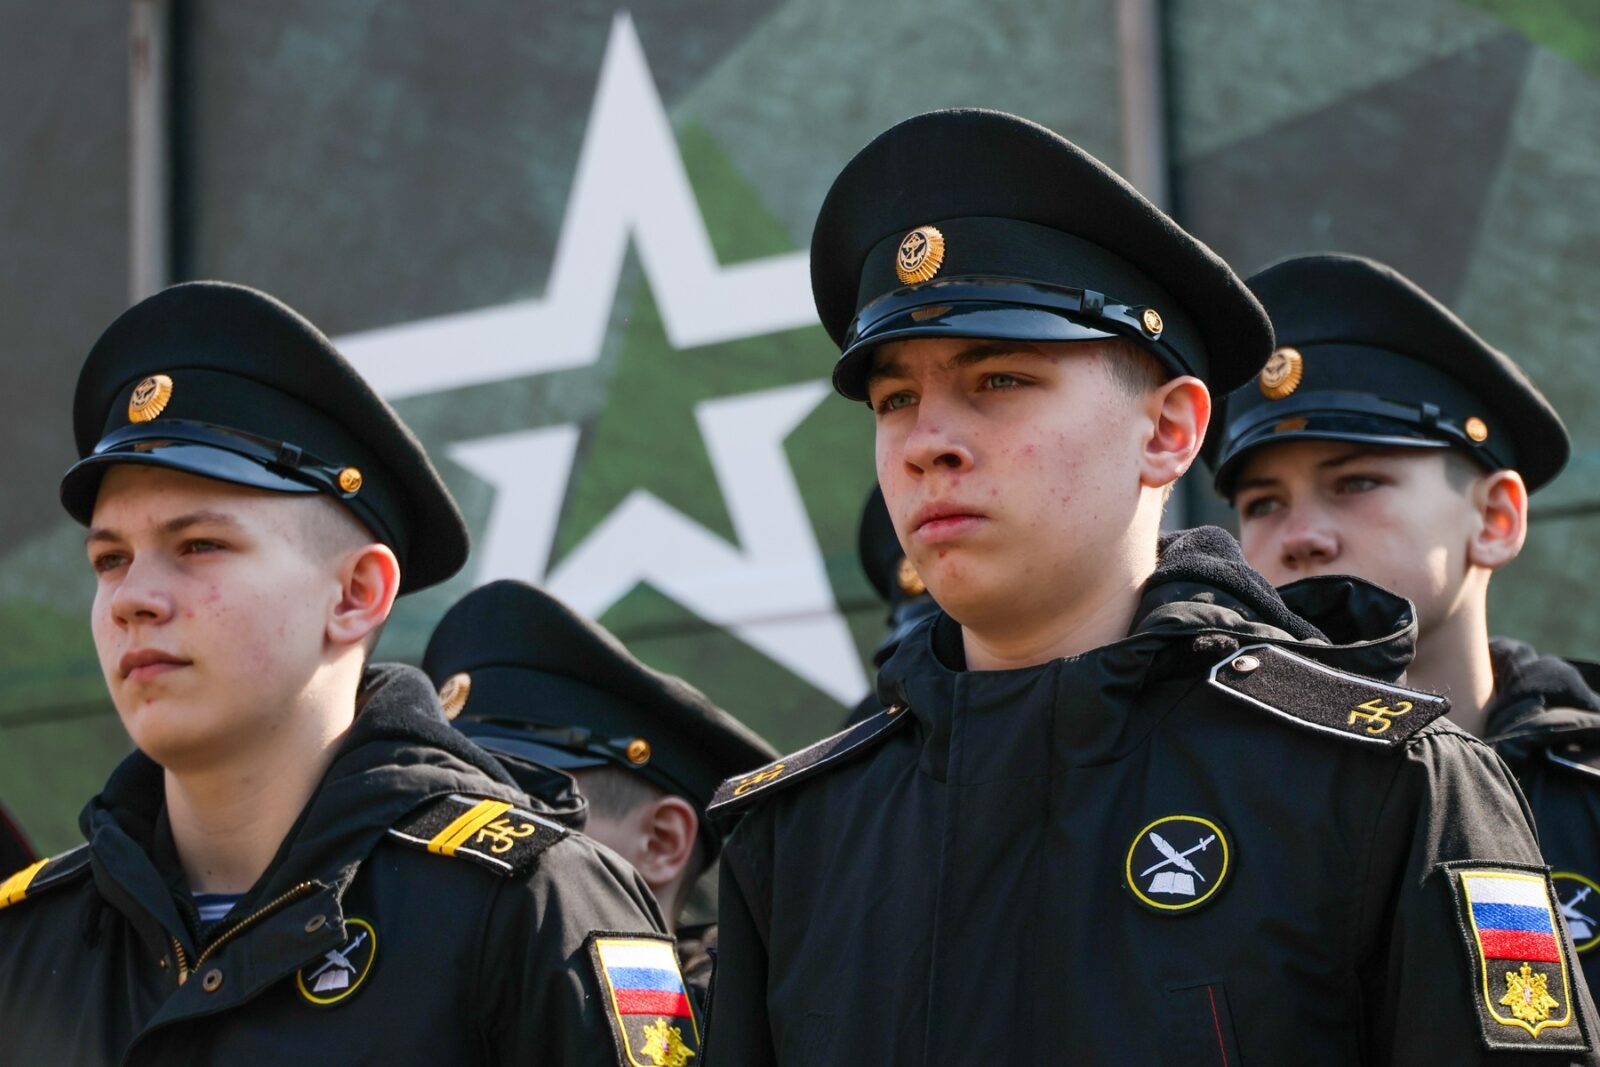 RUSSIA, VLADIVOSTOK - APRIL 1, 2024: Nakhimov Naval School cadets attend a rally marking the arrival of the Sila V Pravde [Strength is the Truth] themed train launched by the Russian Defence Ministry at Vladivostok’s railway station as part of a nationwide military and patriotic campaign.  Yuri Smityuk/TASS,Image: 861494437, License: Rights-managed, Restrictions: FOR EDITORIAL USE ONLY, Model Release: no, Credit line: Yuri Smityuk / TASS / Profimedia